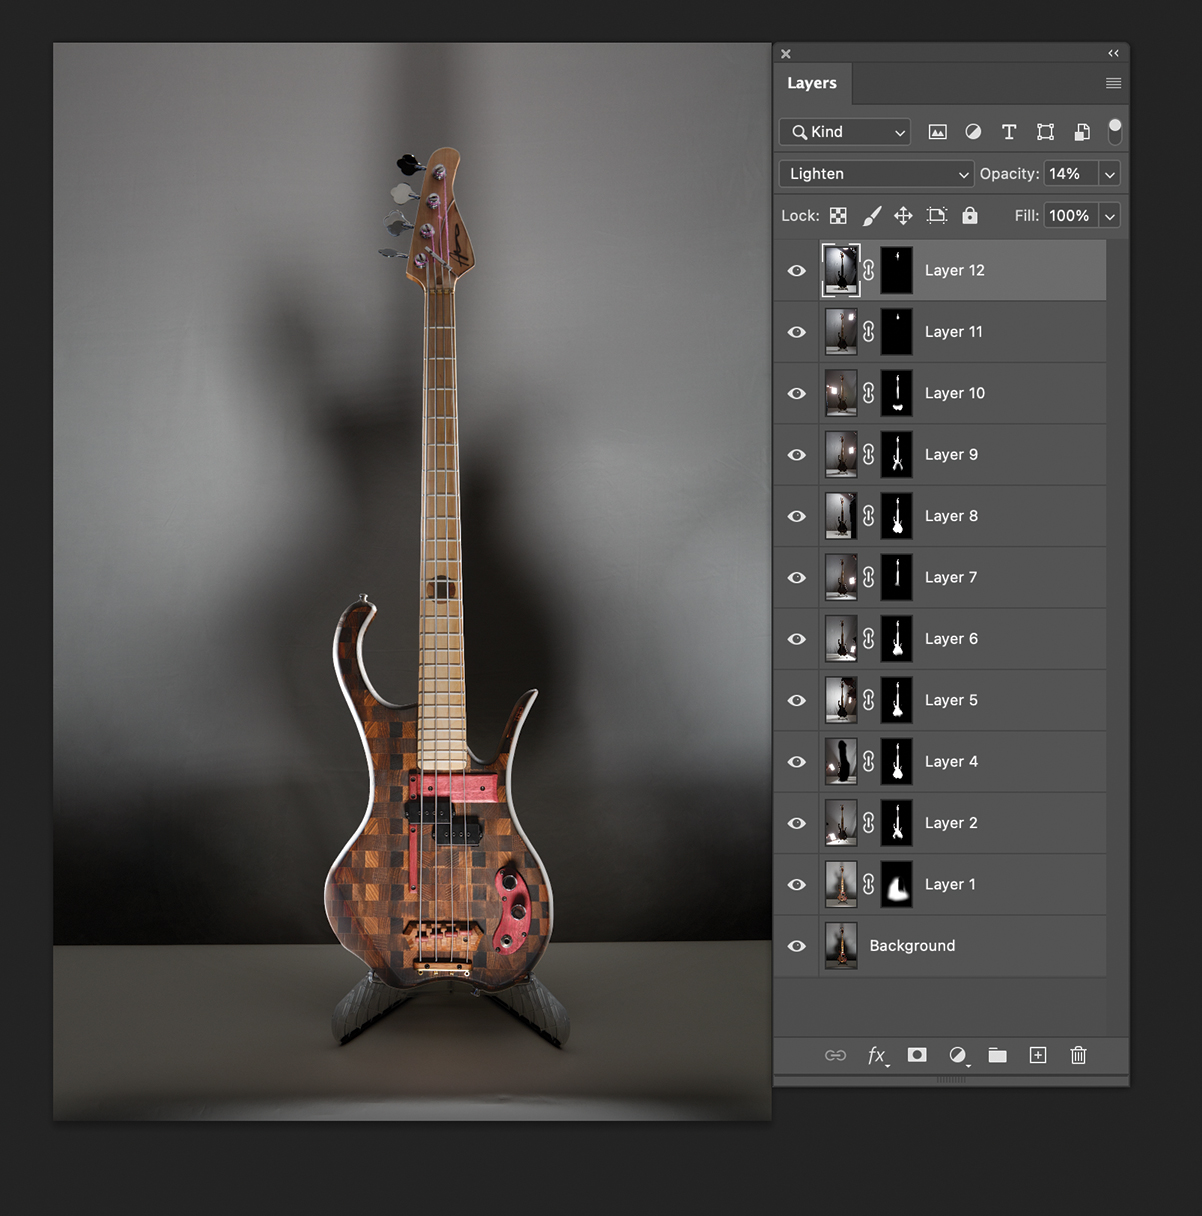 Adobe Photoshop interface showing multiple layers of different photos of the same guitar with a variety of lighting positions and masking